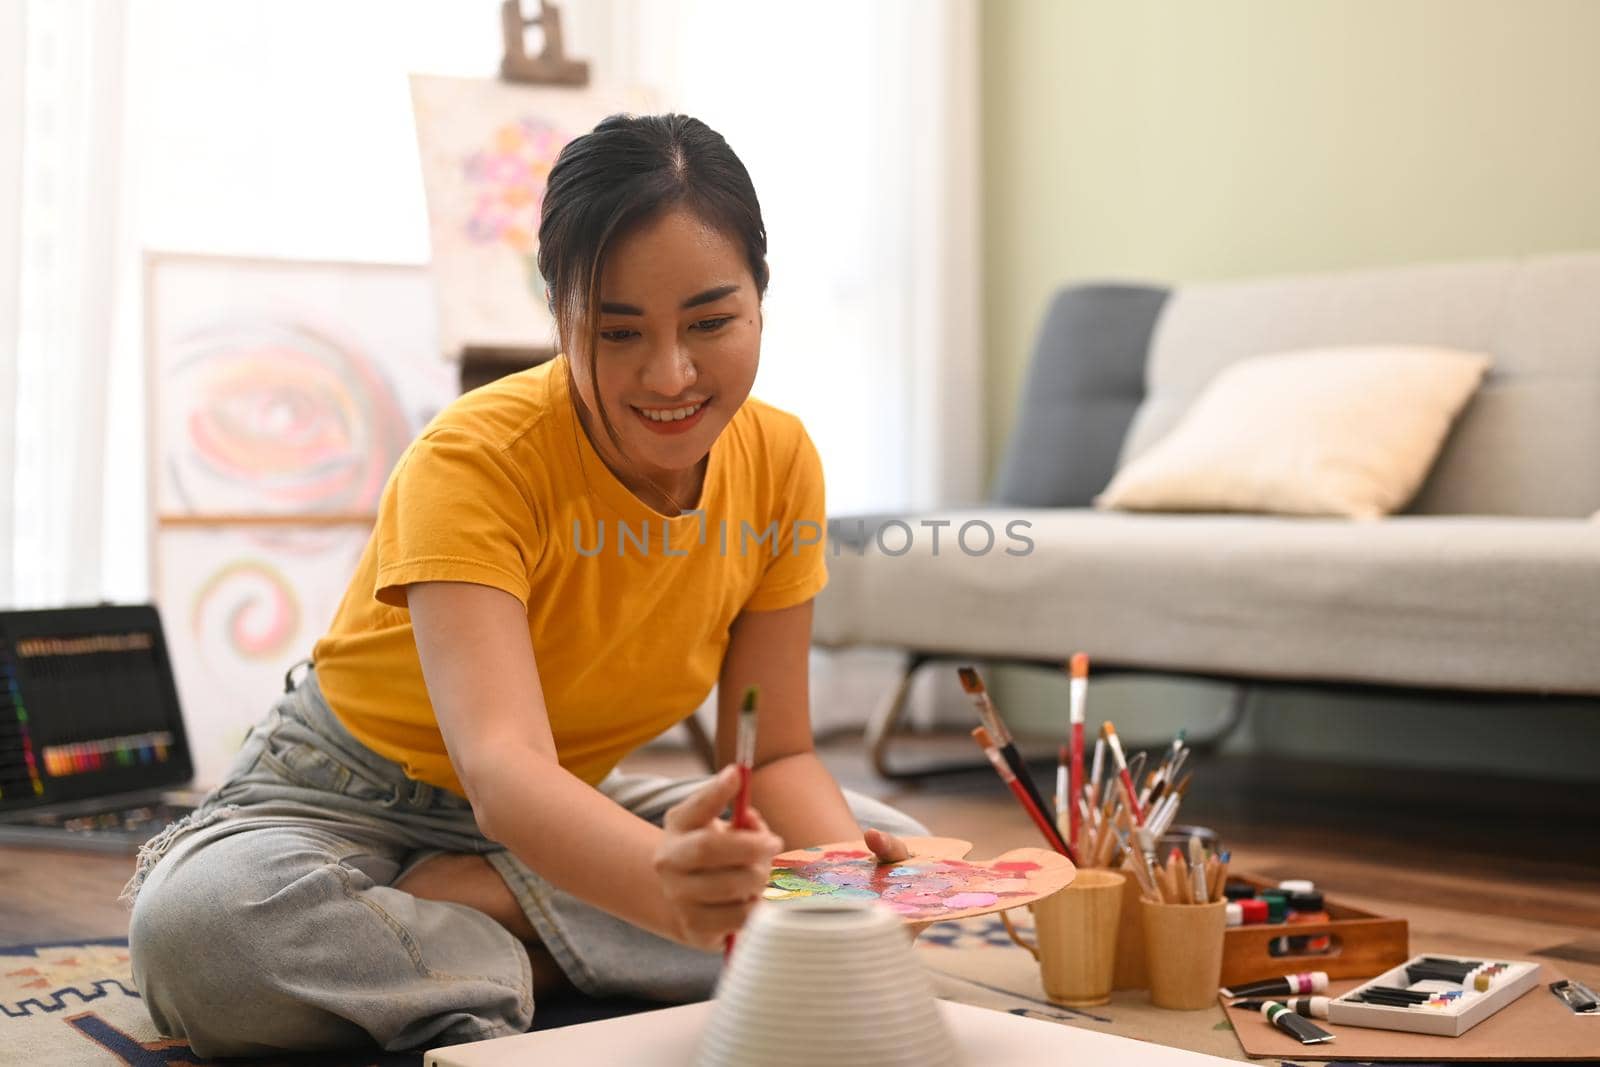 Happy woman painting picture on canvas with oil paints in bright living room. Leisure activity, creative hobby and art concept by prathanchorruangsak